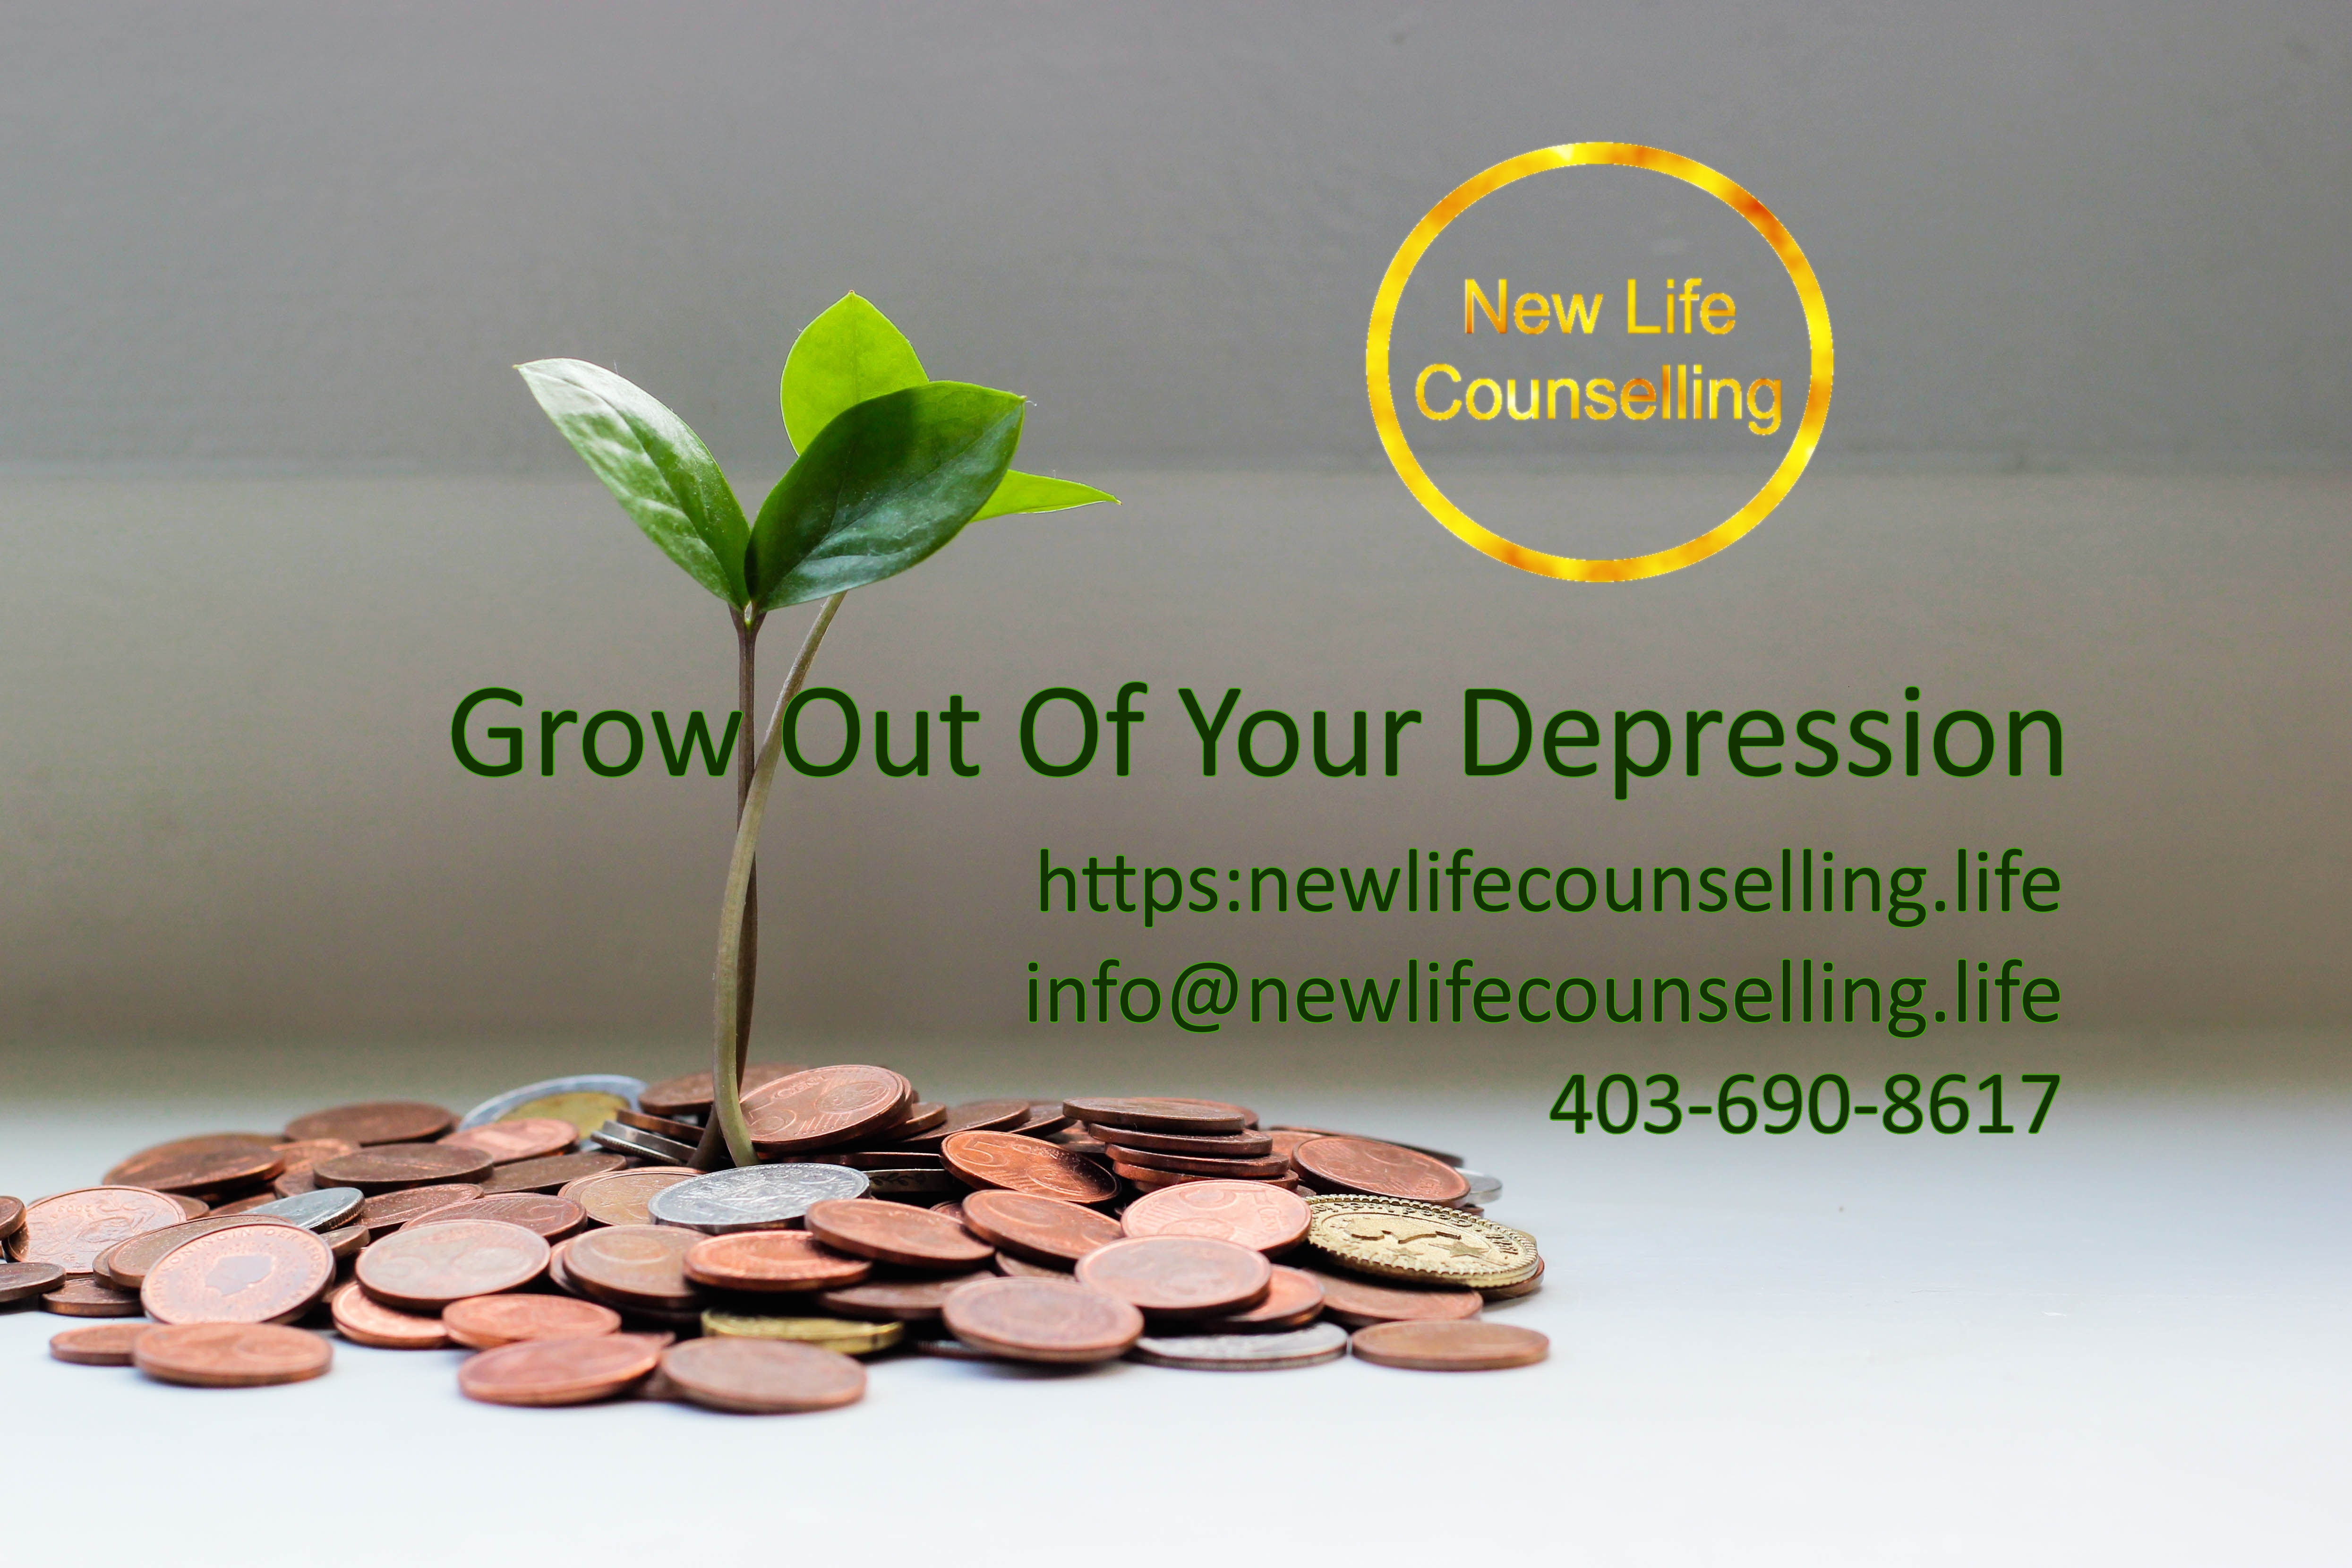 You are currently viewing Grow Out of Your Depression | Depression Help in Calgary   